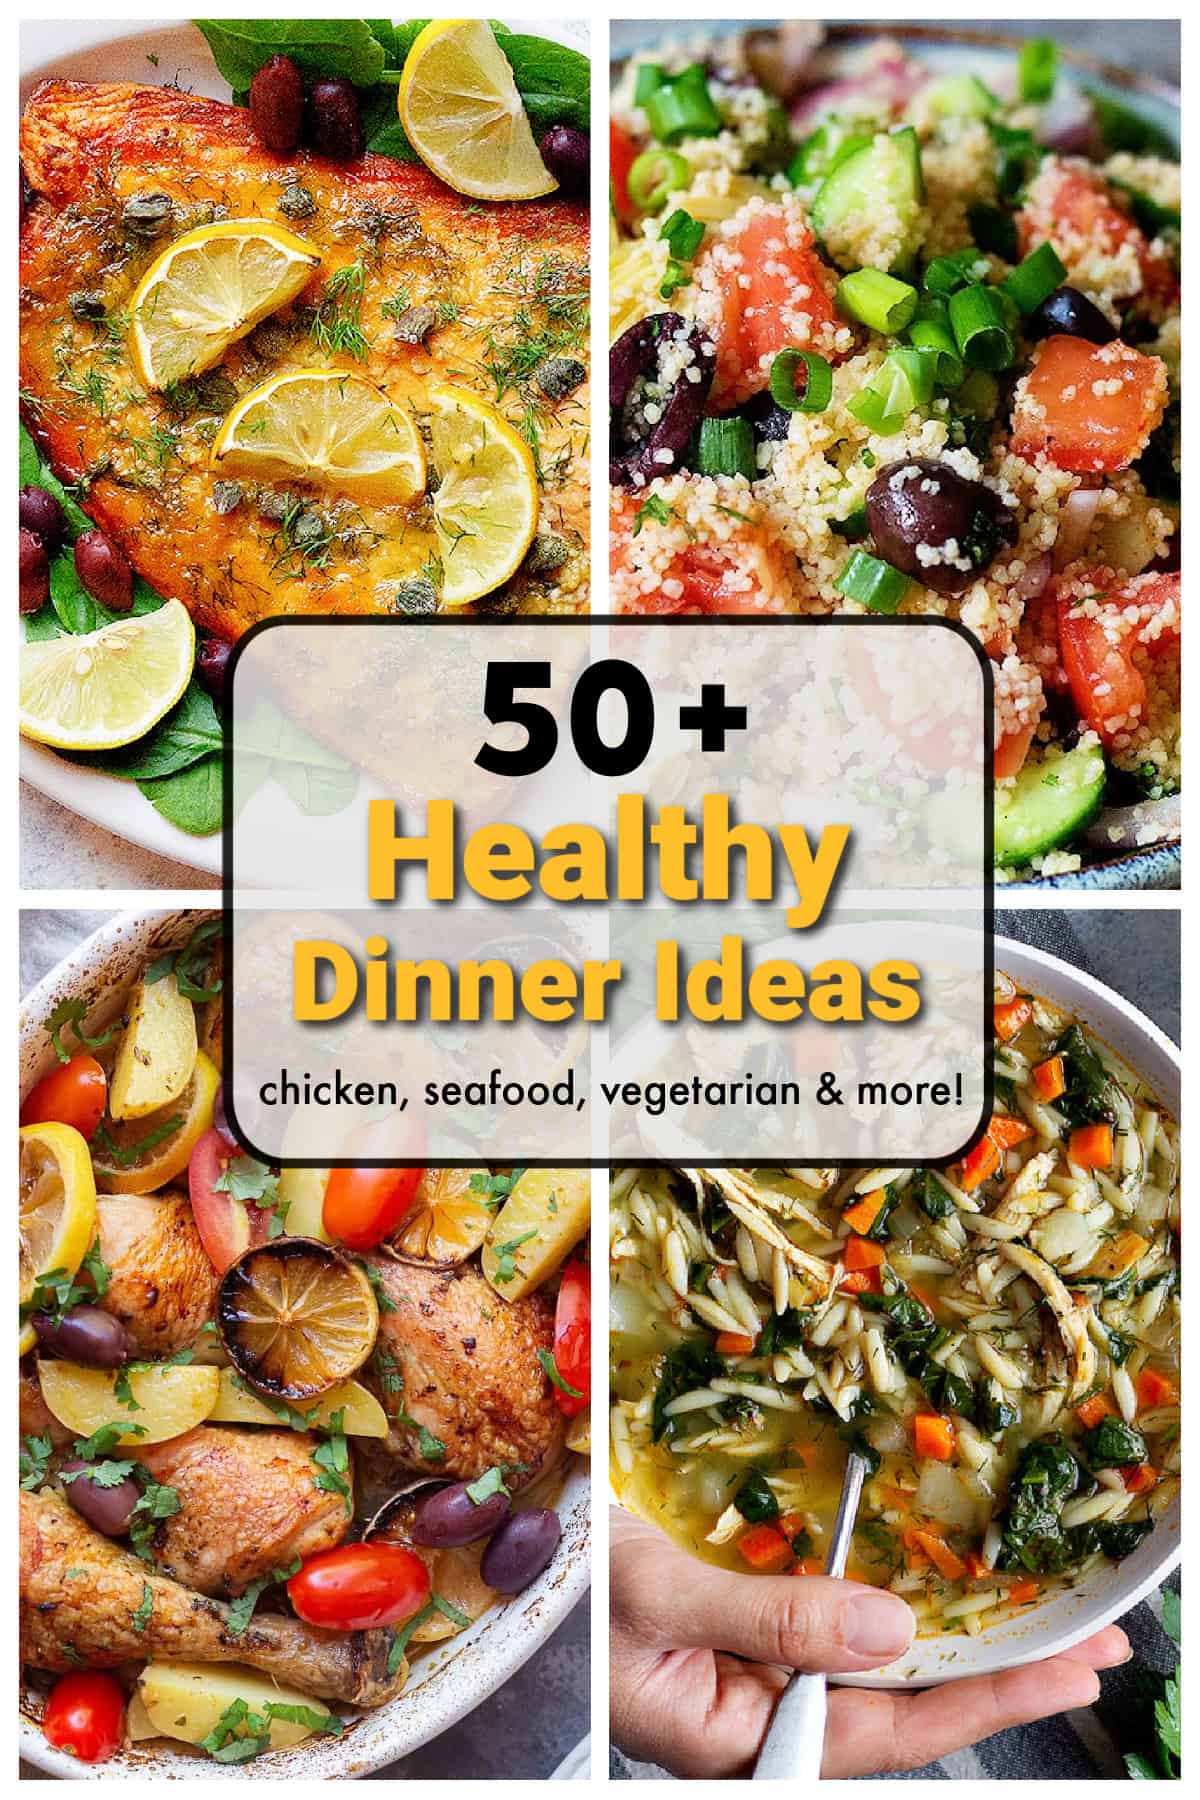 If you're looking for easy healthy dinner ideas, you're in the right place. Check out our collection of over 50 tried and true healthy dinner recipes that are tasty and easy to make. These recipes call for ingredients that you probably already have at home. Enjoy making recipes that make you feel good and satisfied! 